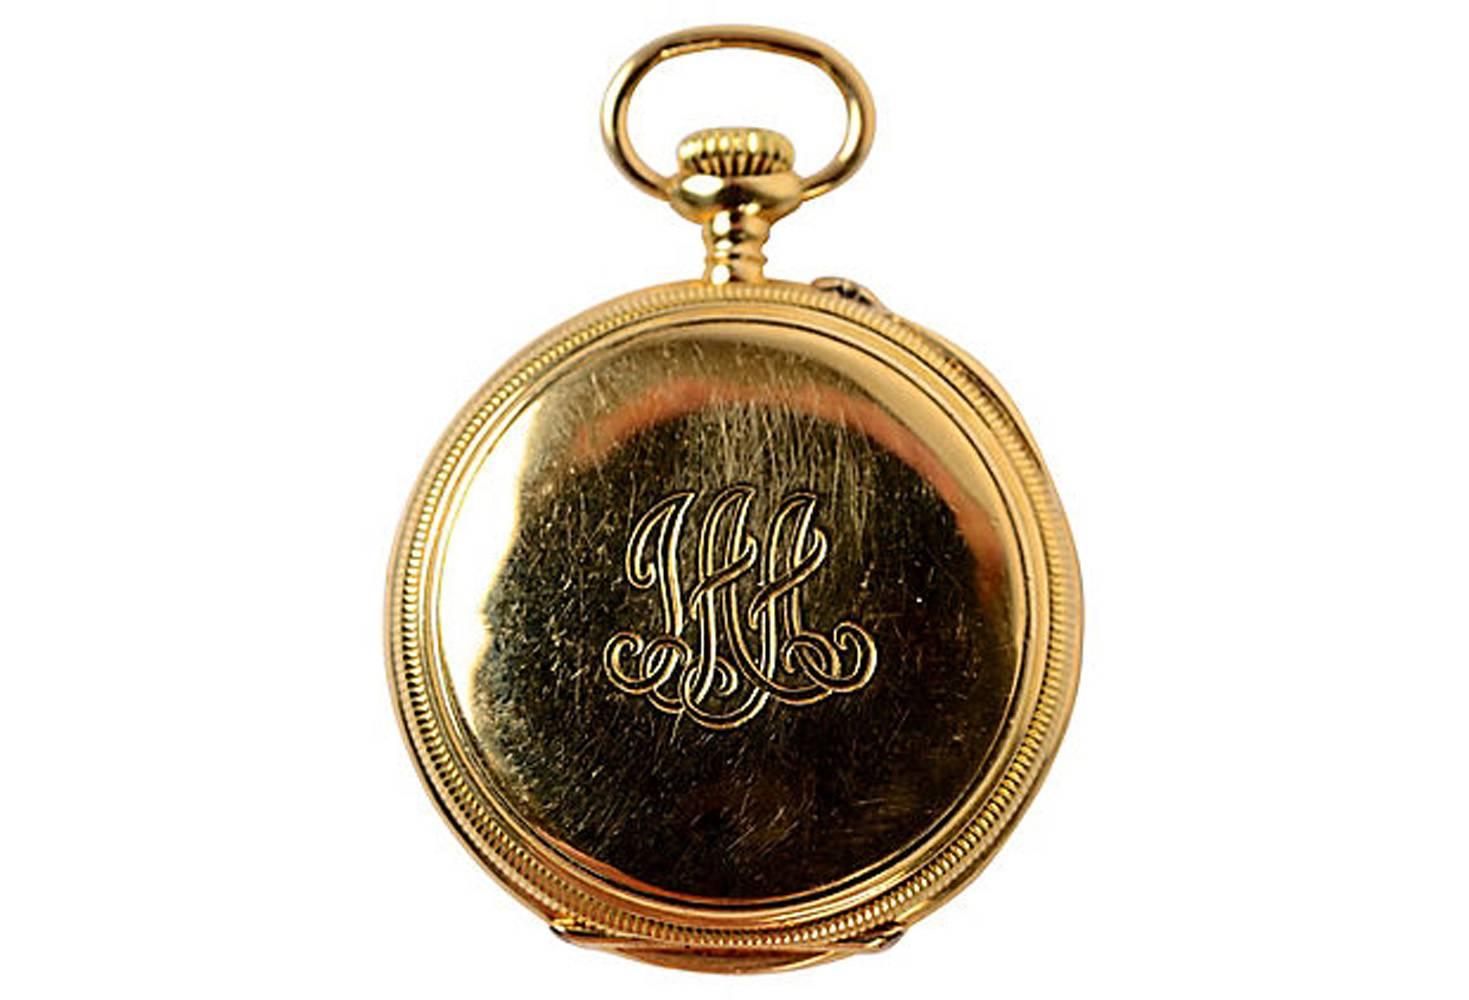 Vacheron Constantin 18K gold pocket watch dating from the late 19th c. The watch is in perfect operating condition and the works were recently cleaned. Vacheron Constantin, one of the oldest continuously operating watch manufacturers in the world